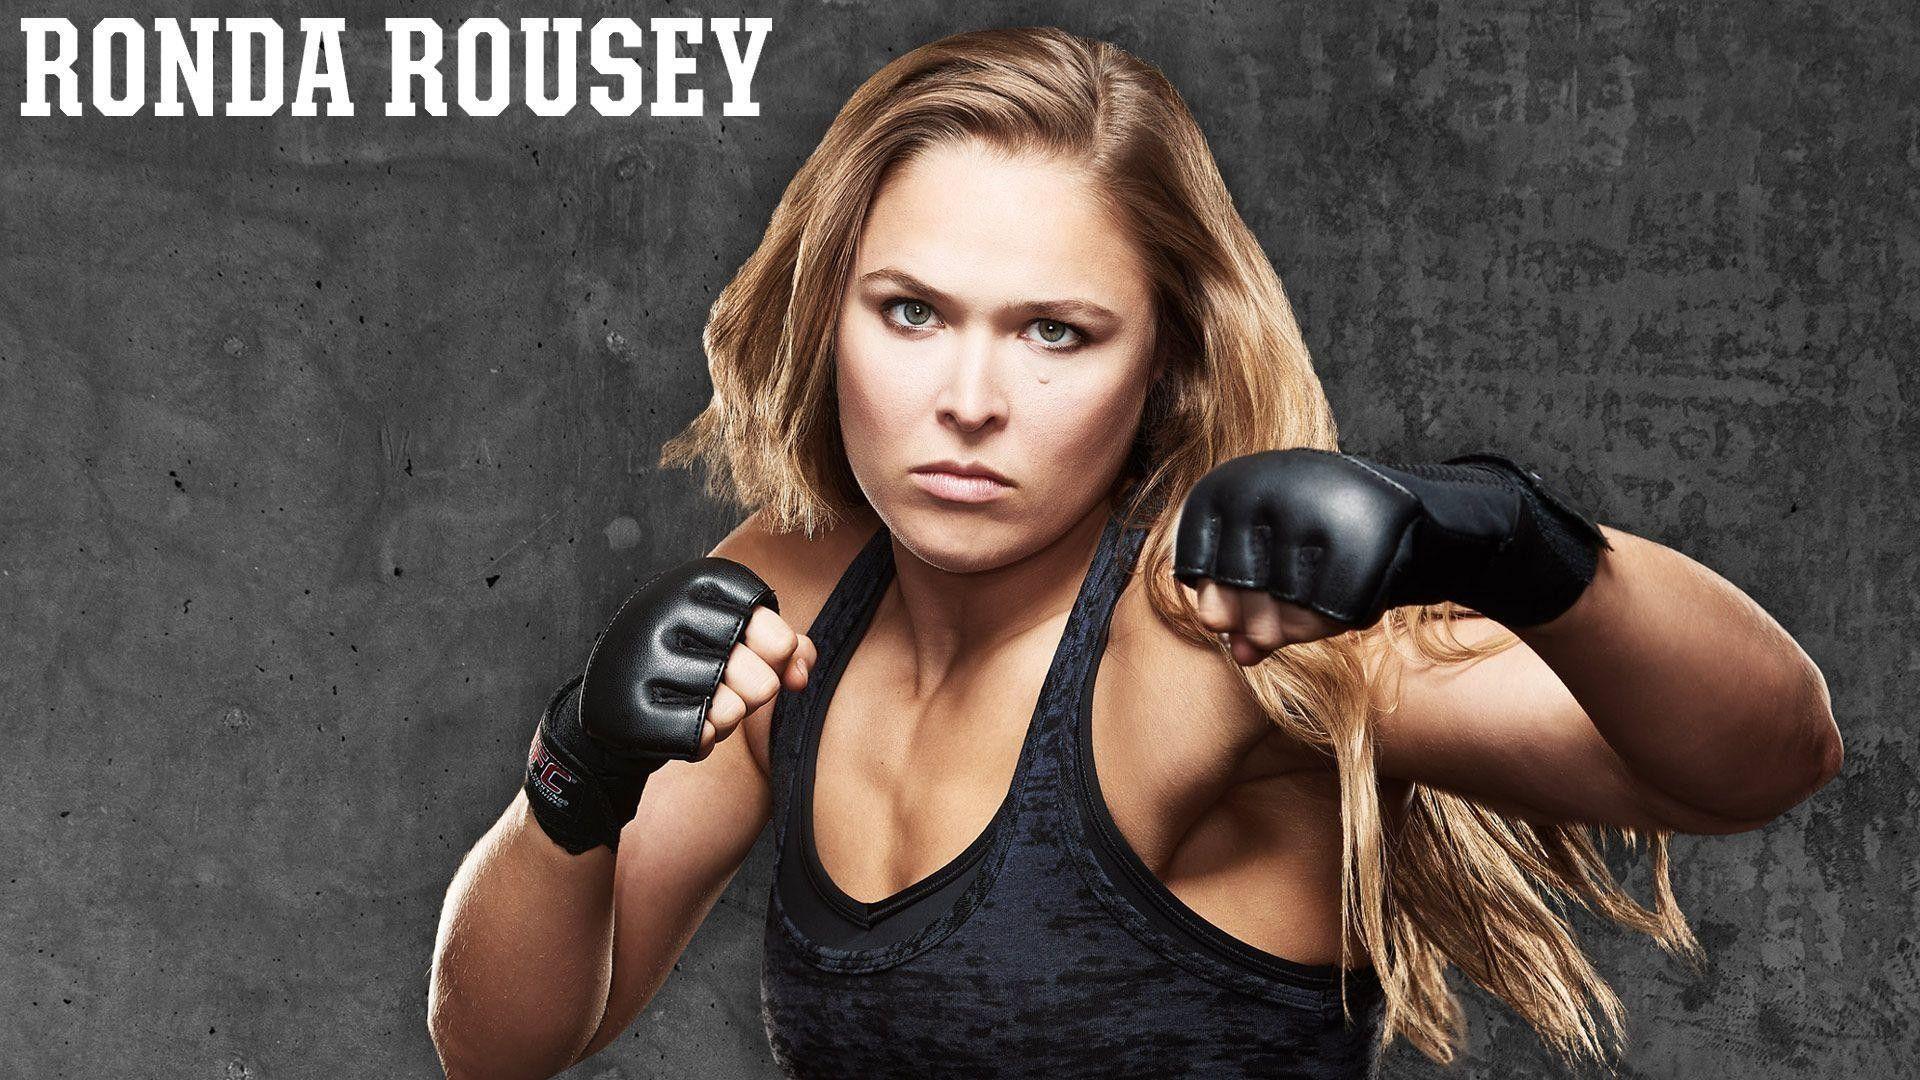 Ronda Rousey Wallpapers Top Free Ronda Rousey Backgrounds Wallpaperaccess